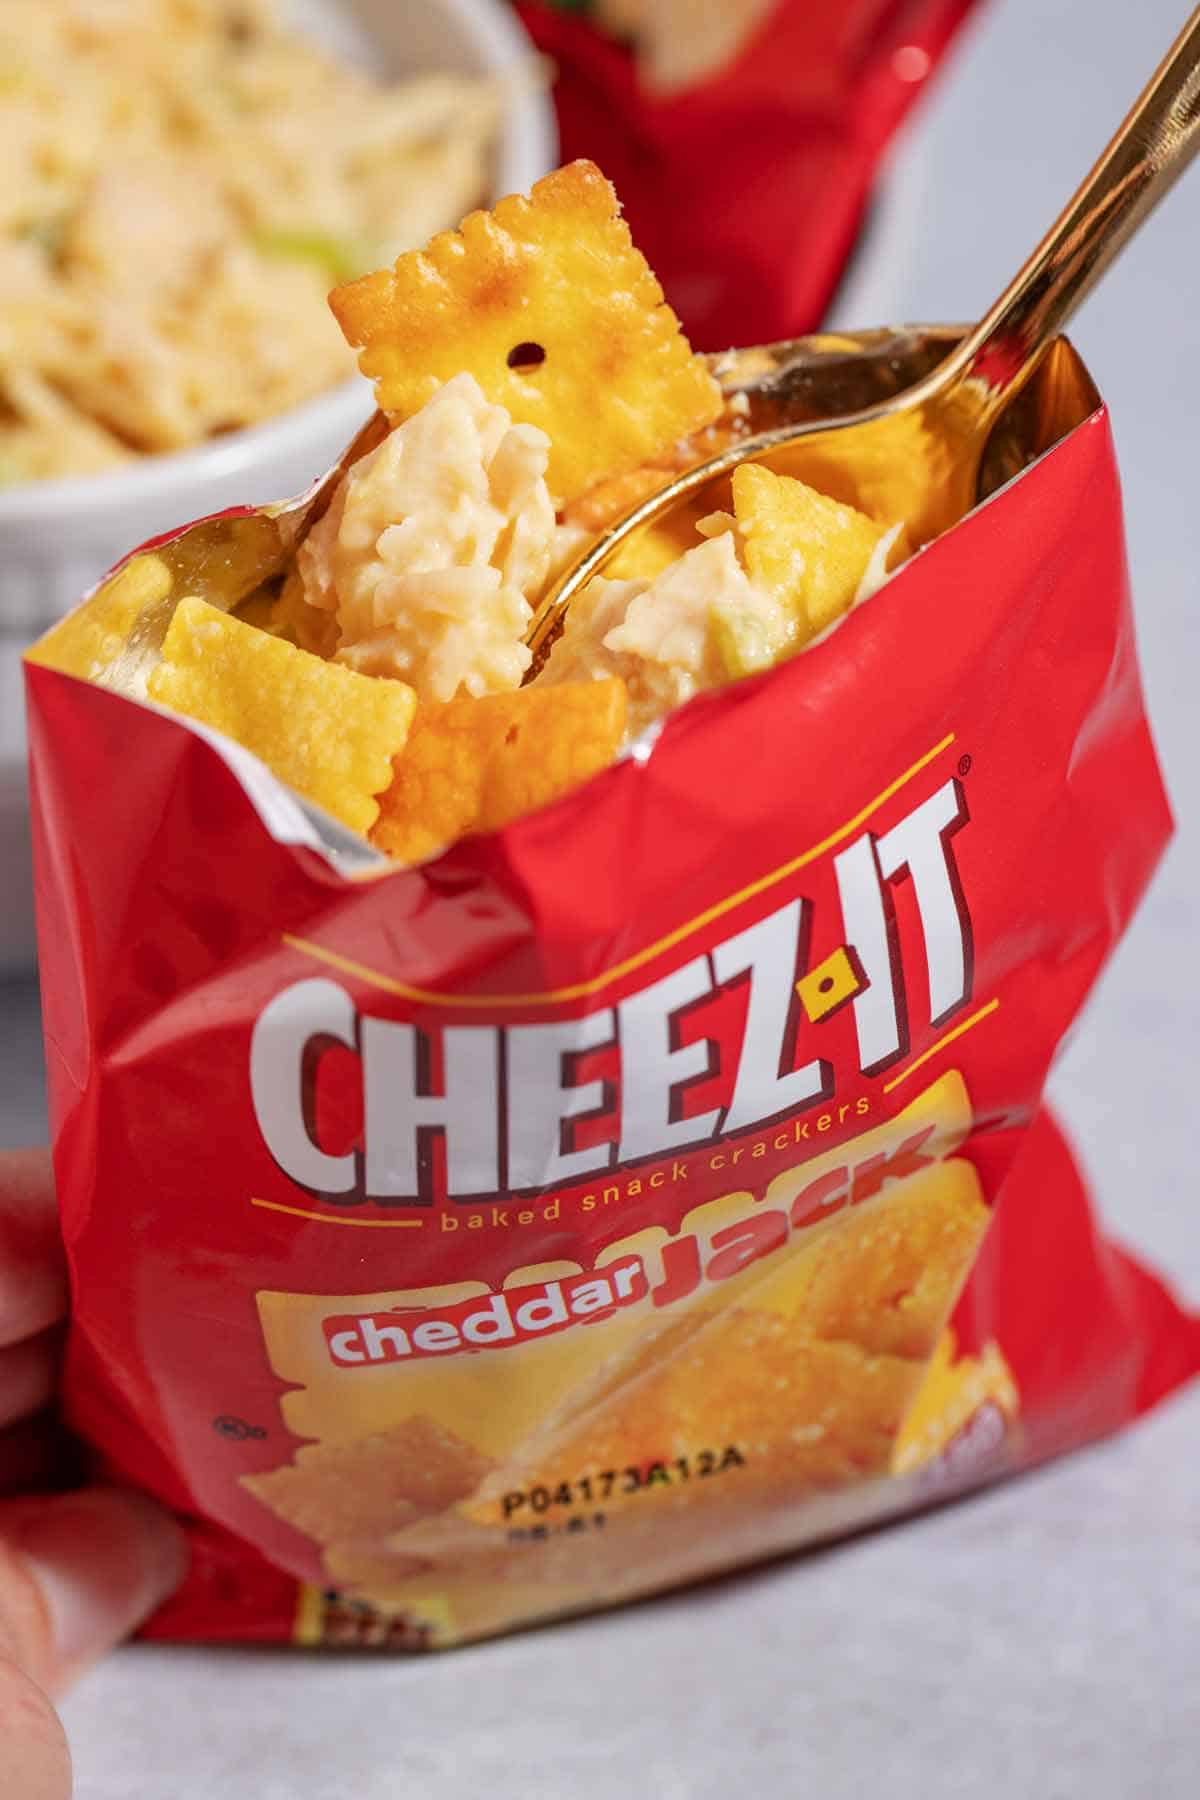 Individual snack bag of Cheez-It crackers with chicken salad inside. This makes walking chicken salad.